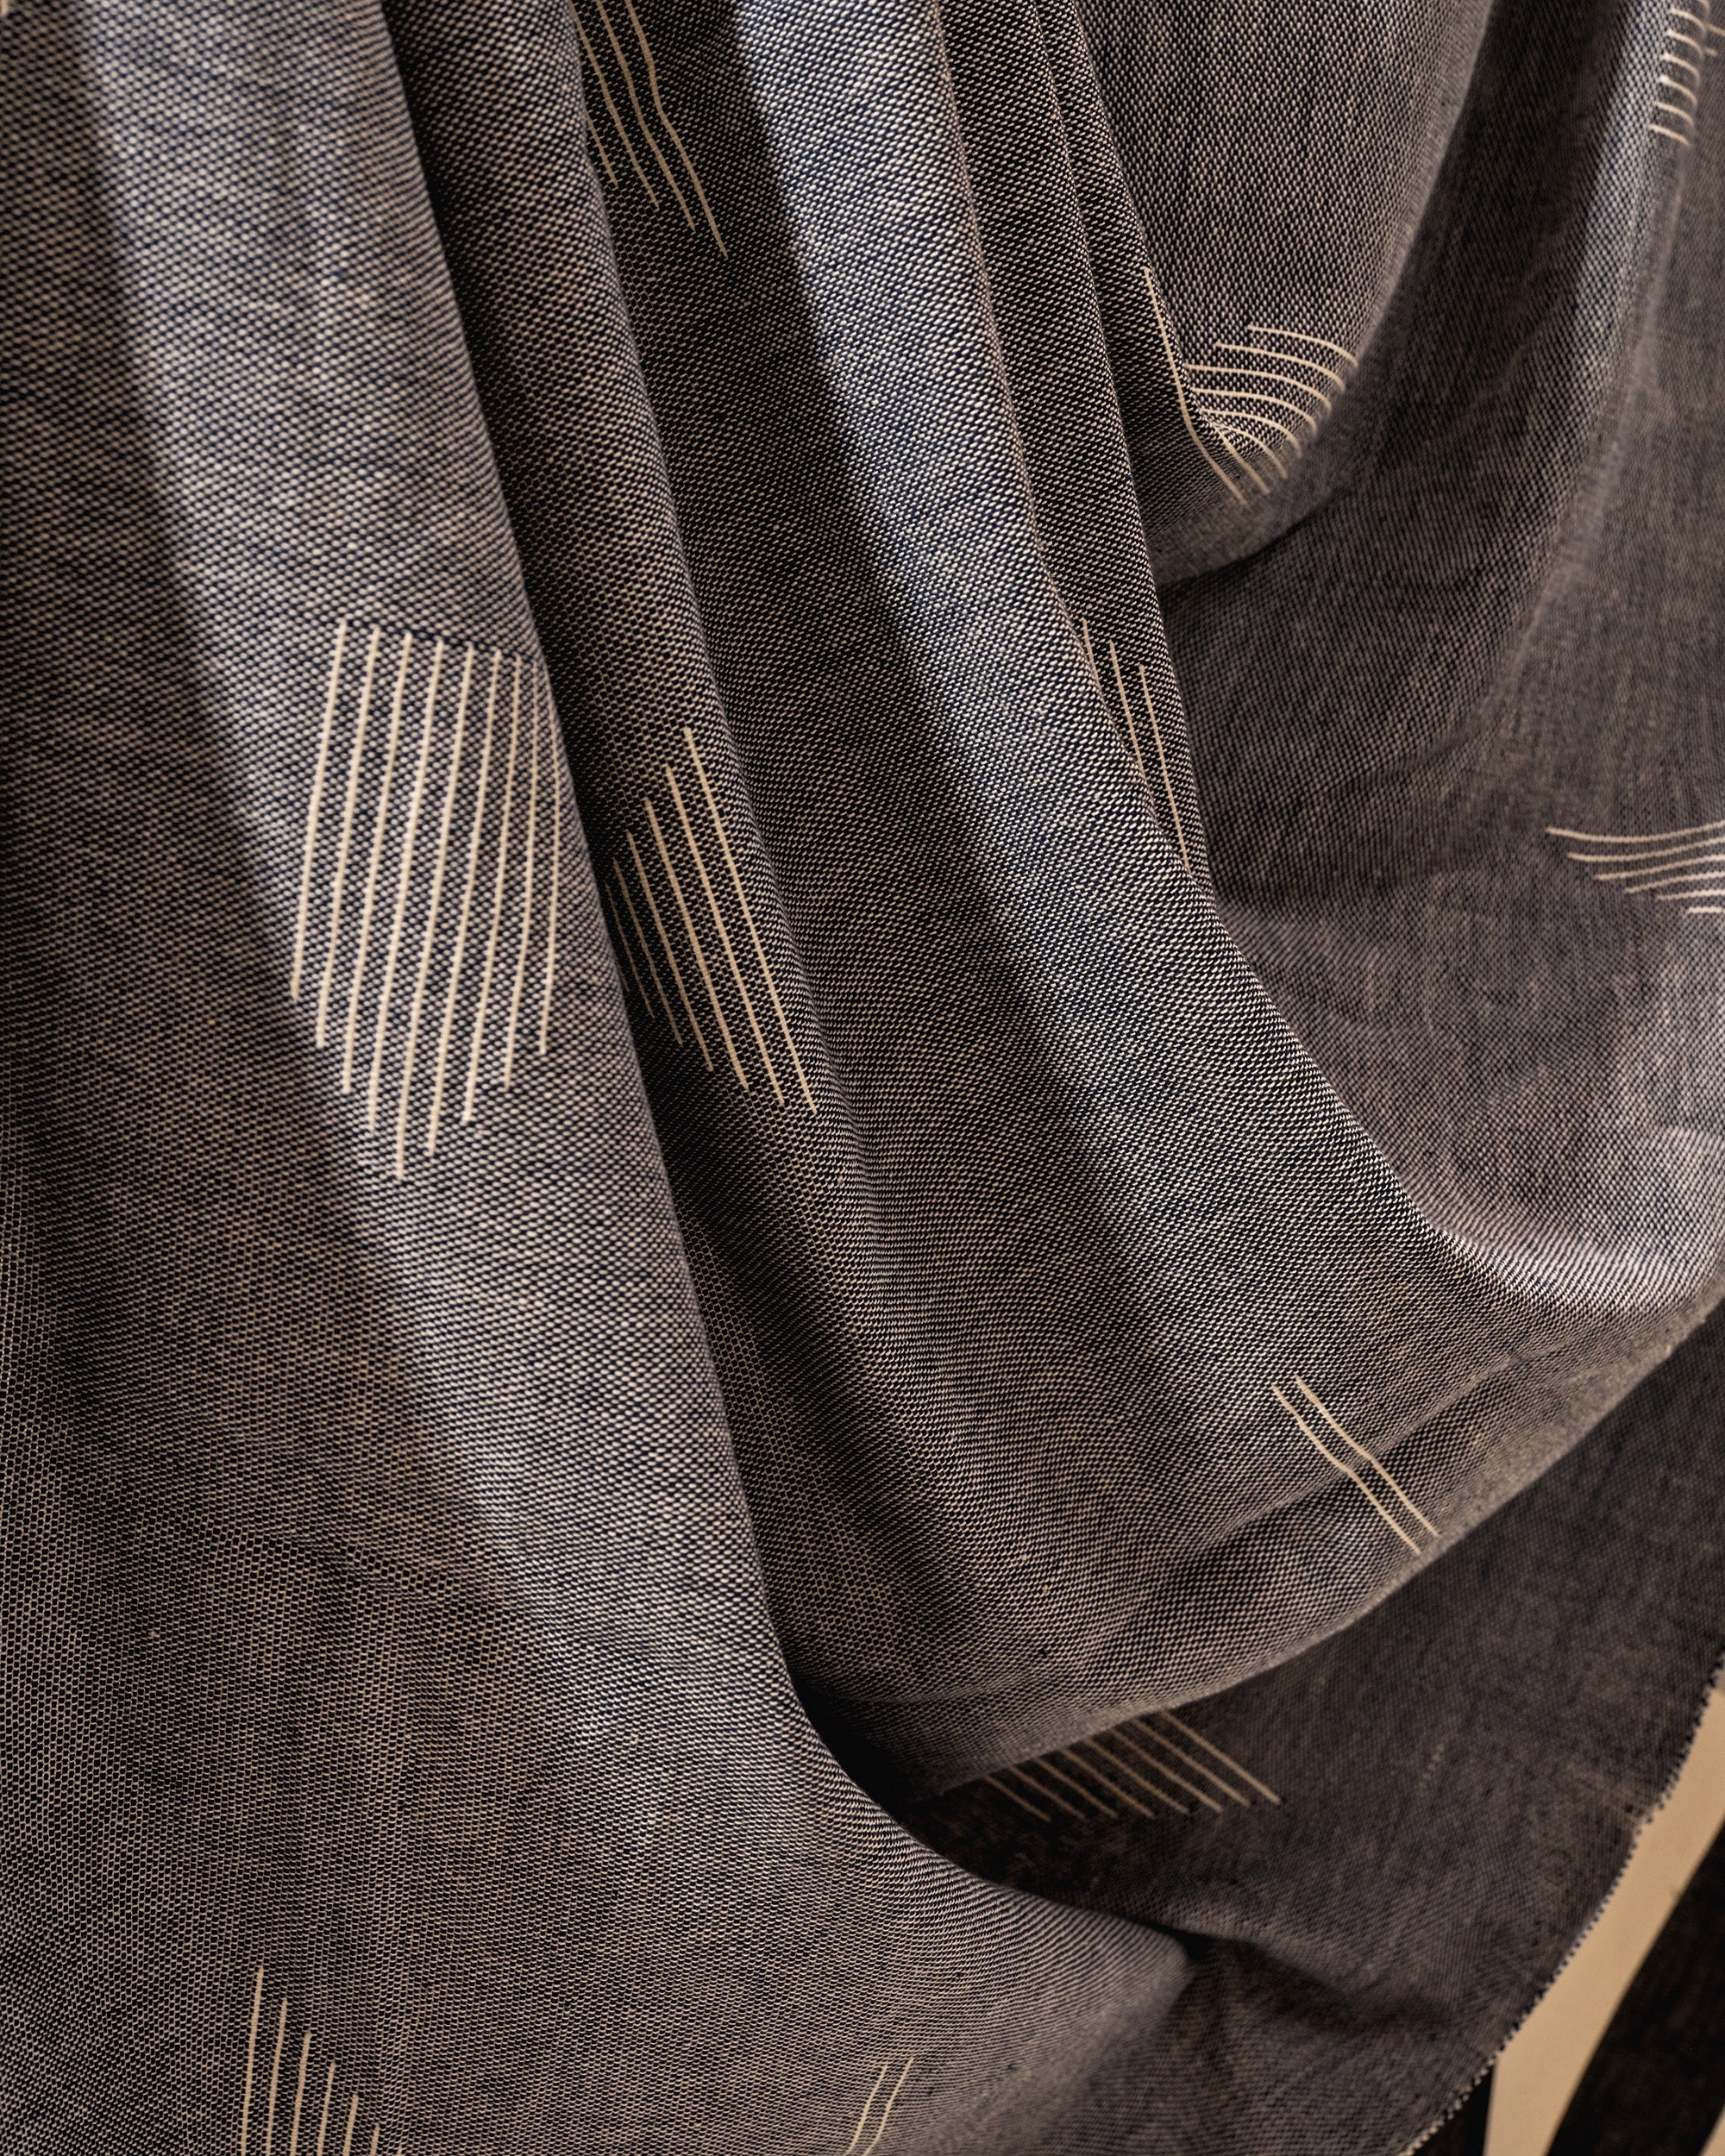 Handwoven Fabric by the Yard - Ethical Home Decor & Textiles | MINNA ...